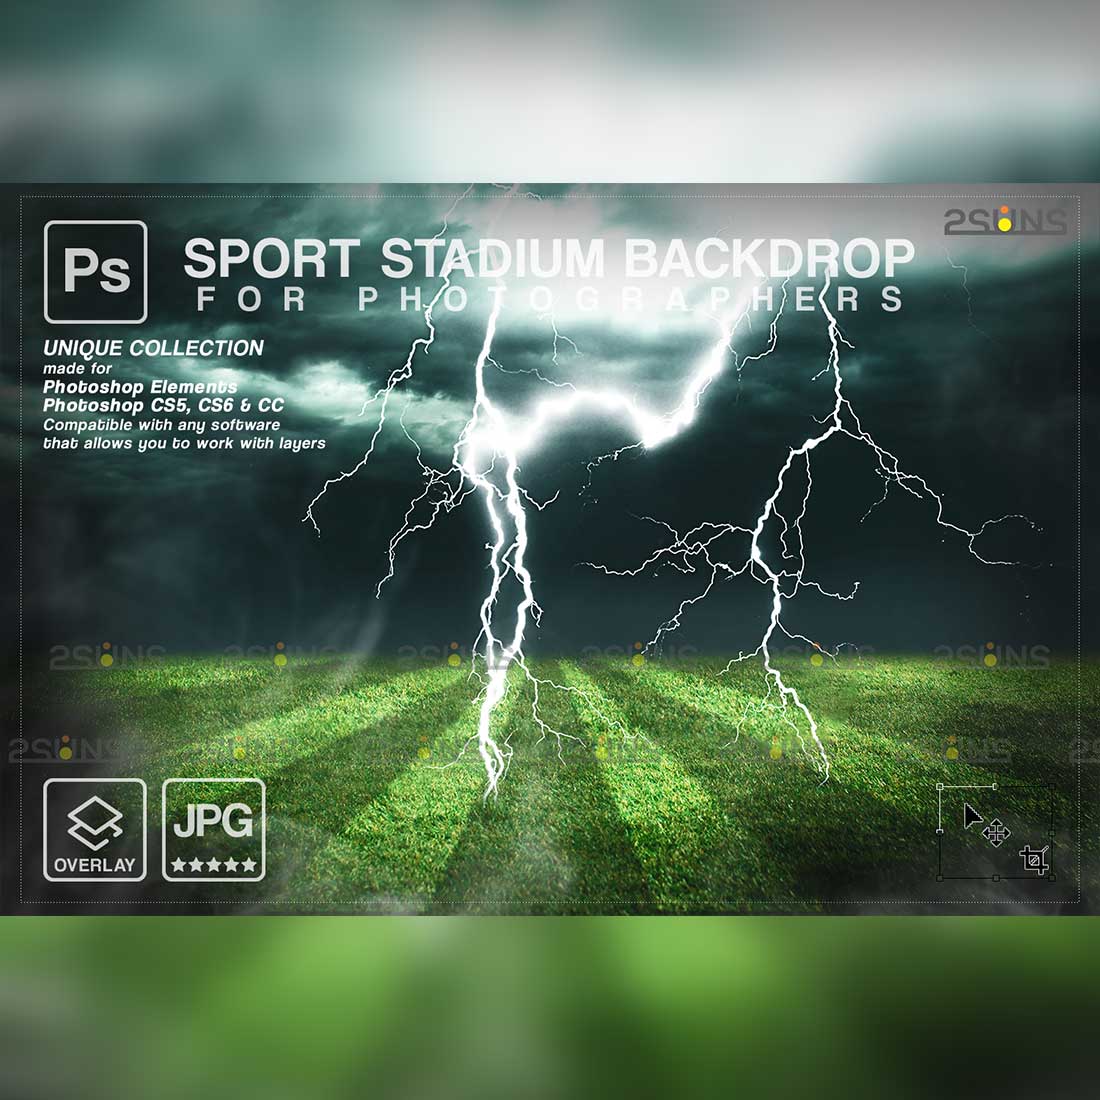 Football Backdrop Sports Digital Backdrop Photography Preview Image.